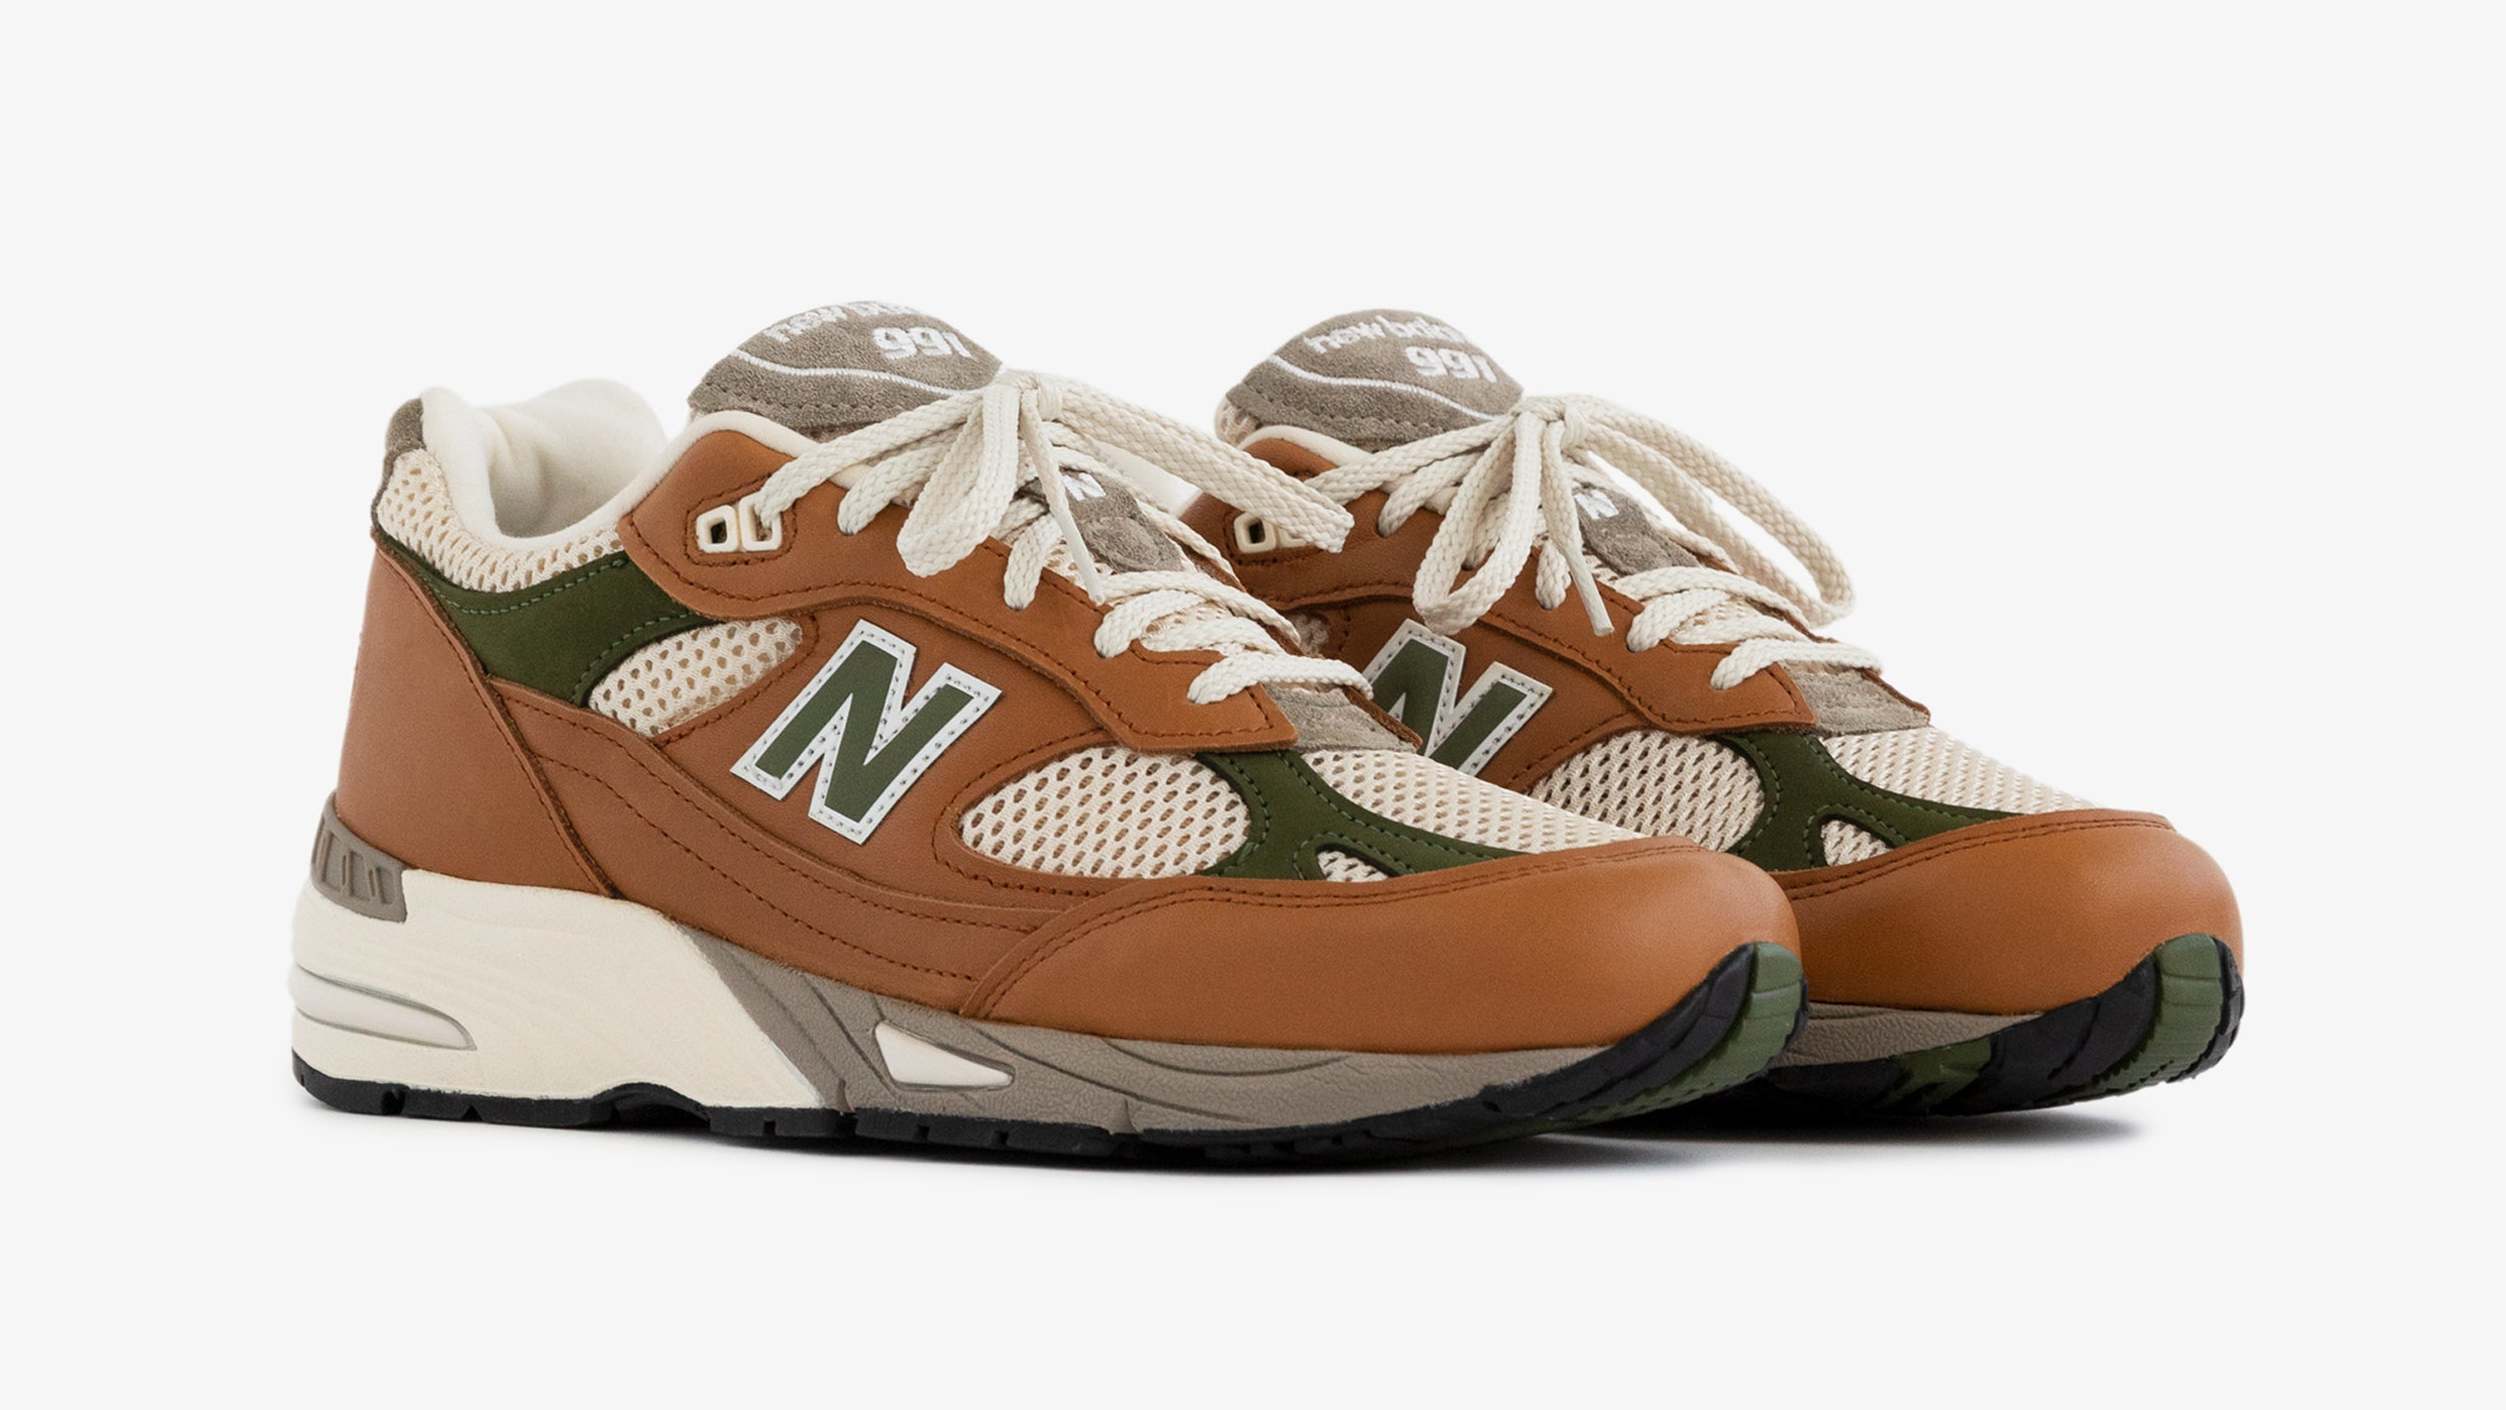 Leon Dore New Balance 991 Collab Spring/Summer 2022 | Sole Collector